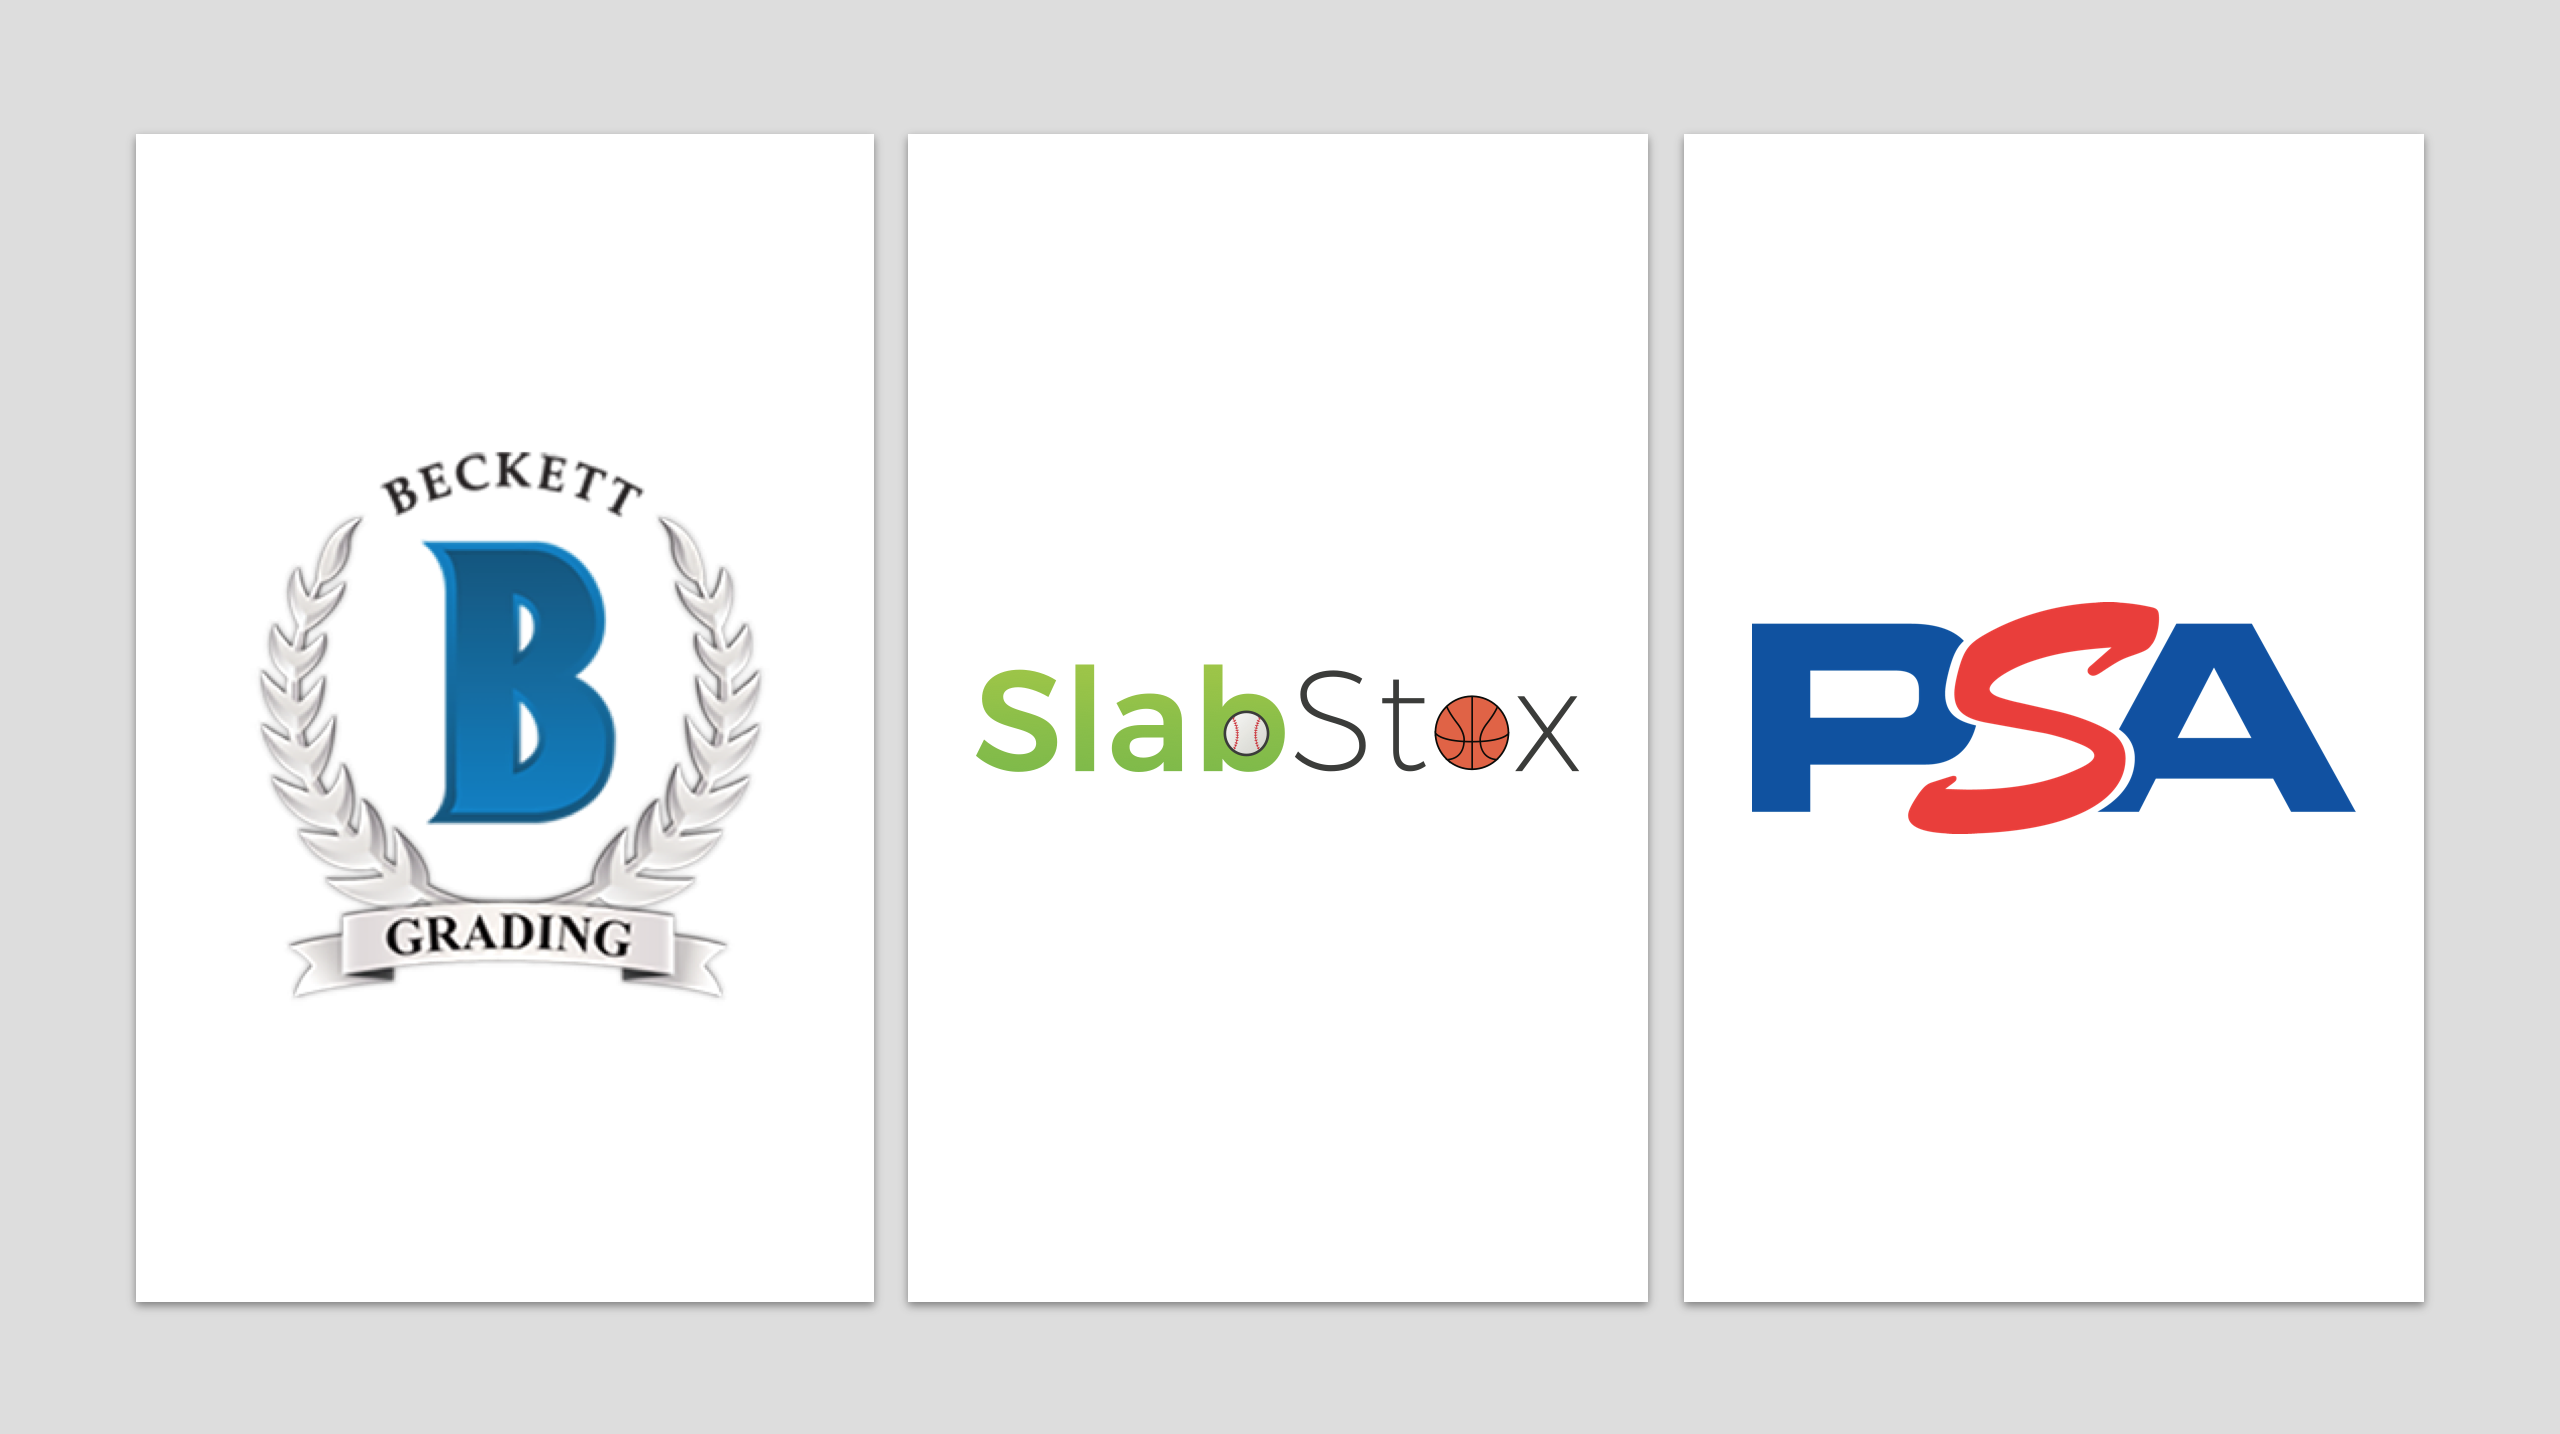 Collage of three business logos side by side: Beckett Grading, SlabStox, and PSA